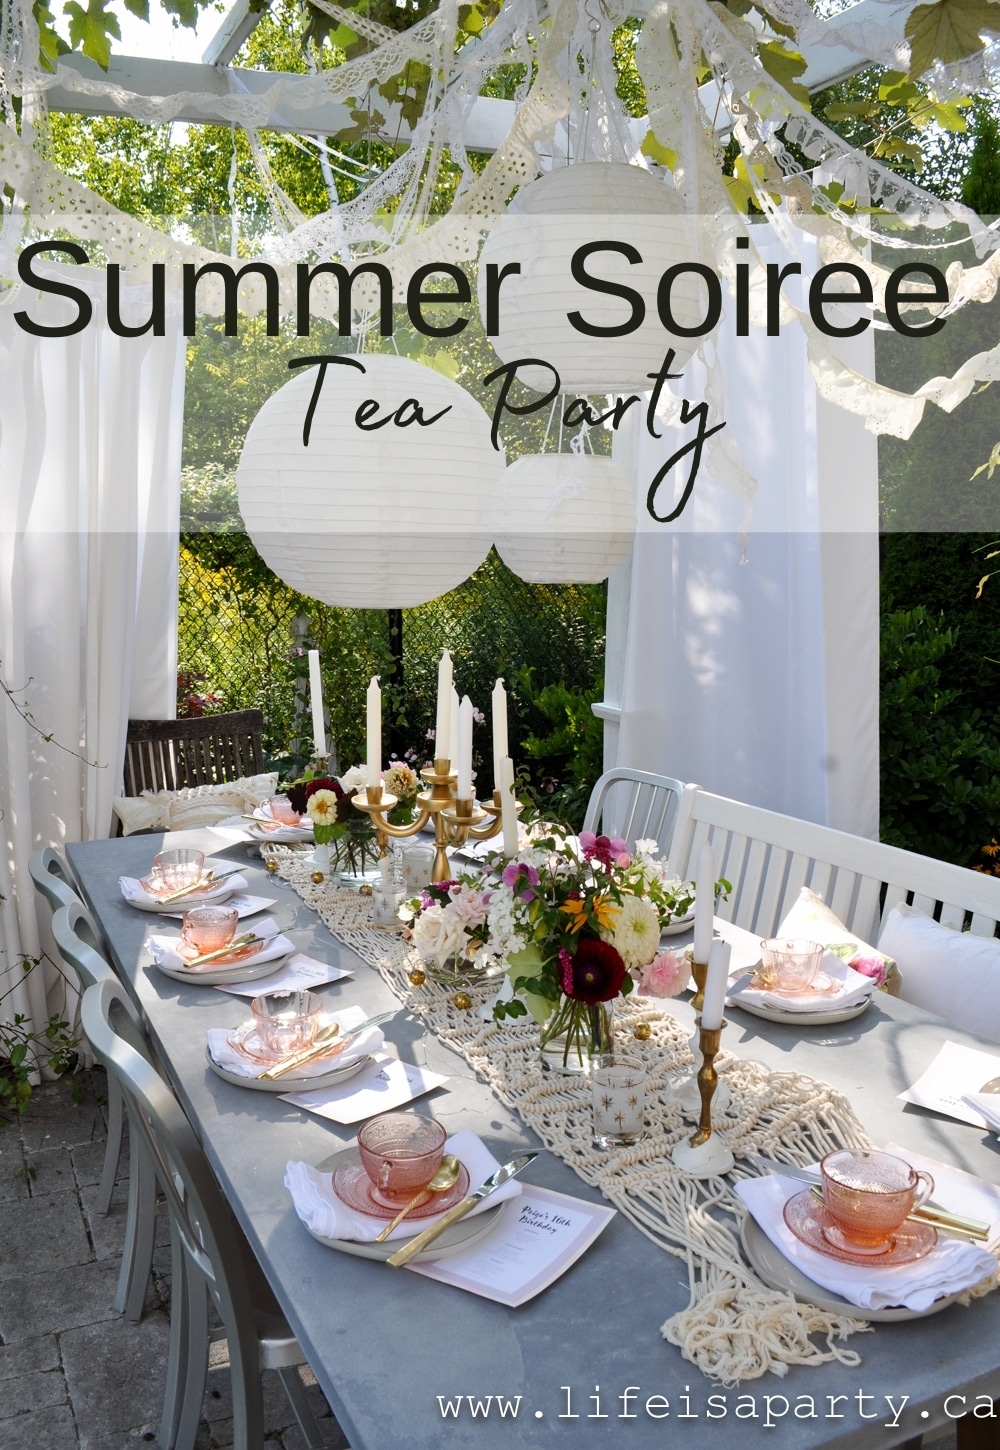 Summer Soiree Evening Tea Party: the perfect summer soiree evening with boho decor, fresh flower crowns, a tea party menu and tea cocktails.